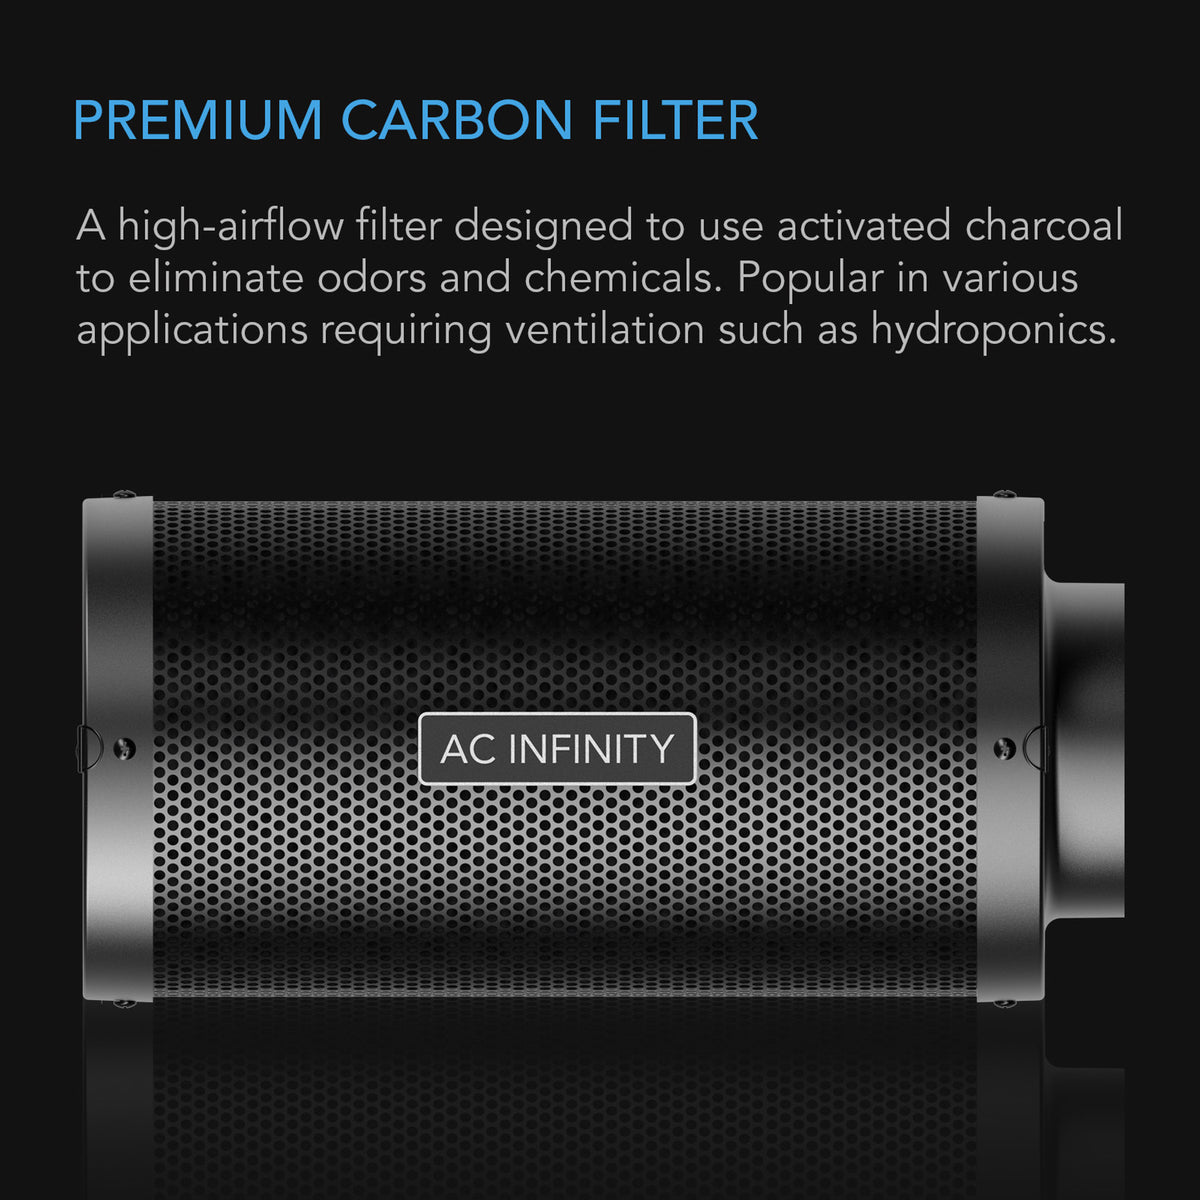 Premium Carbon Filter by AC Infinity